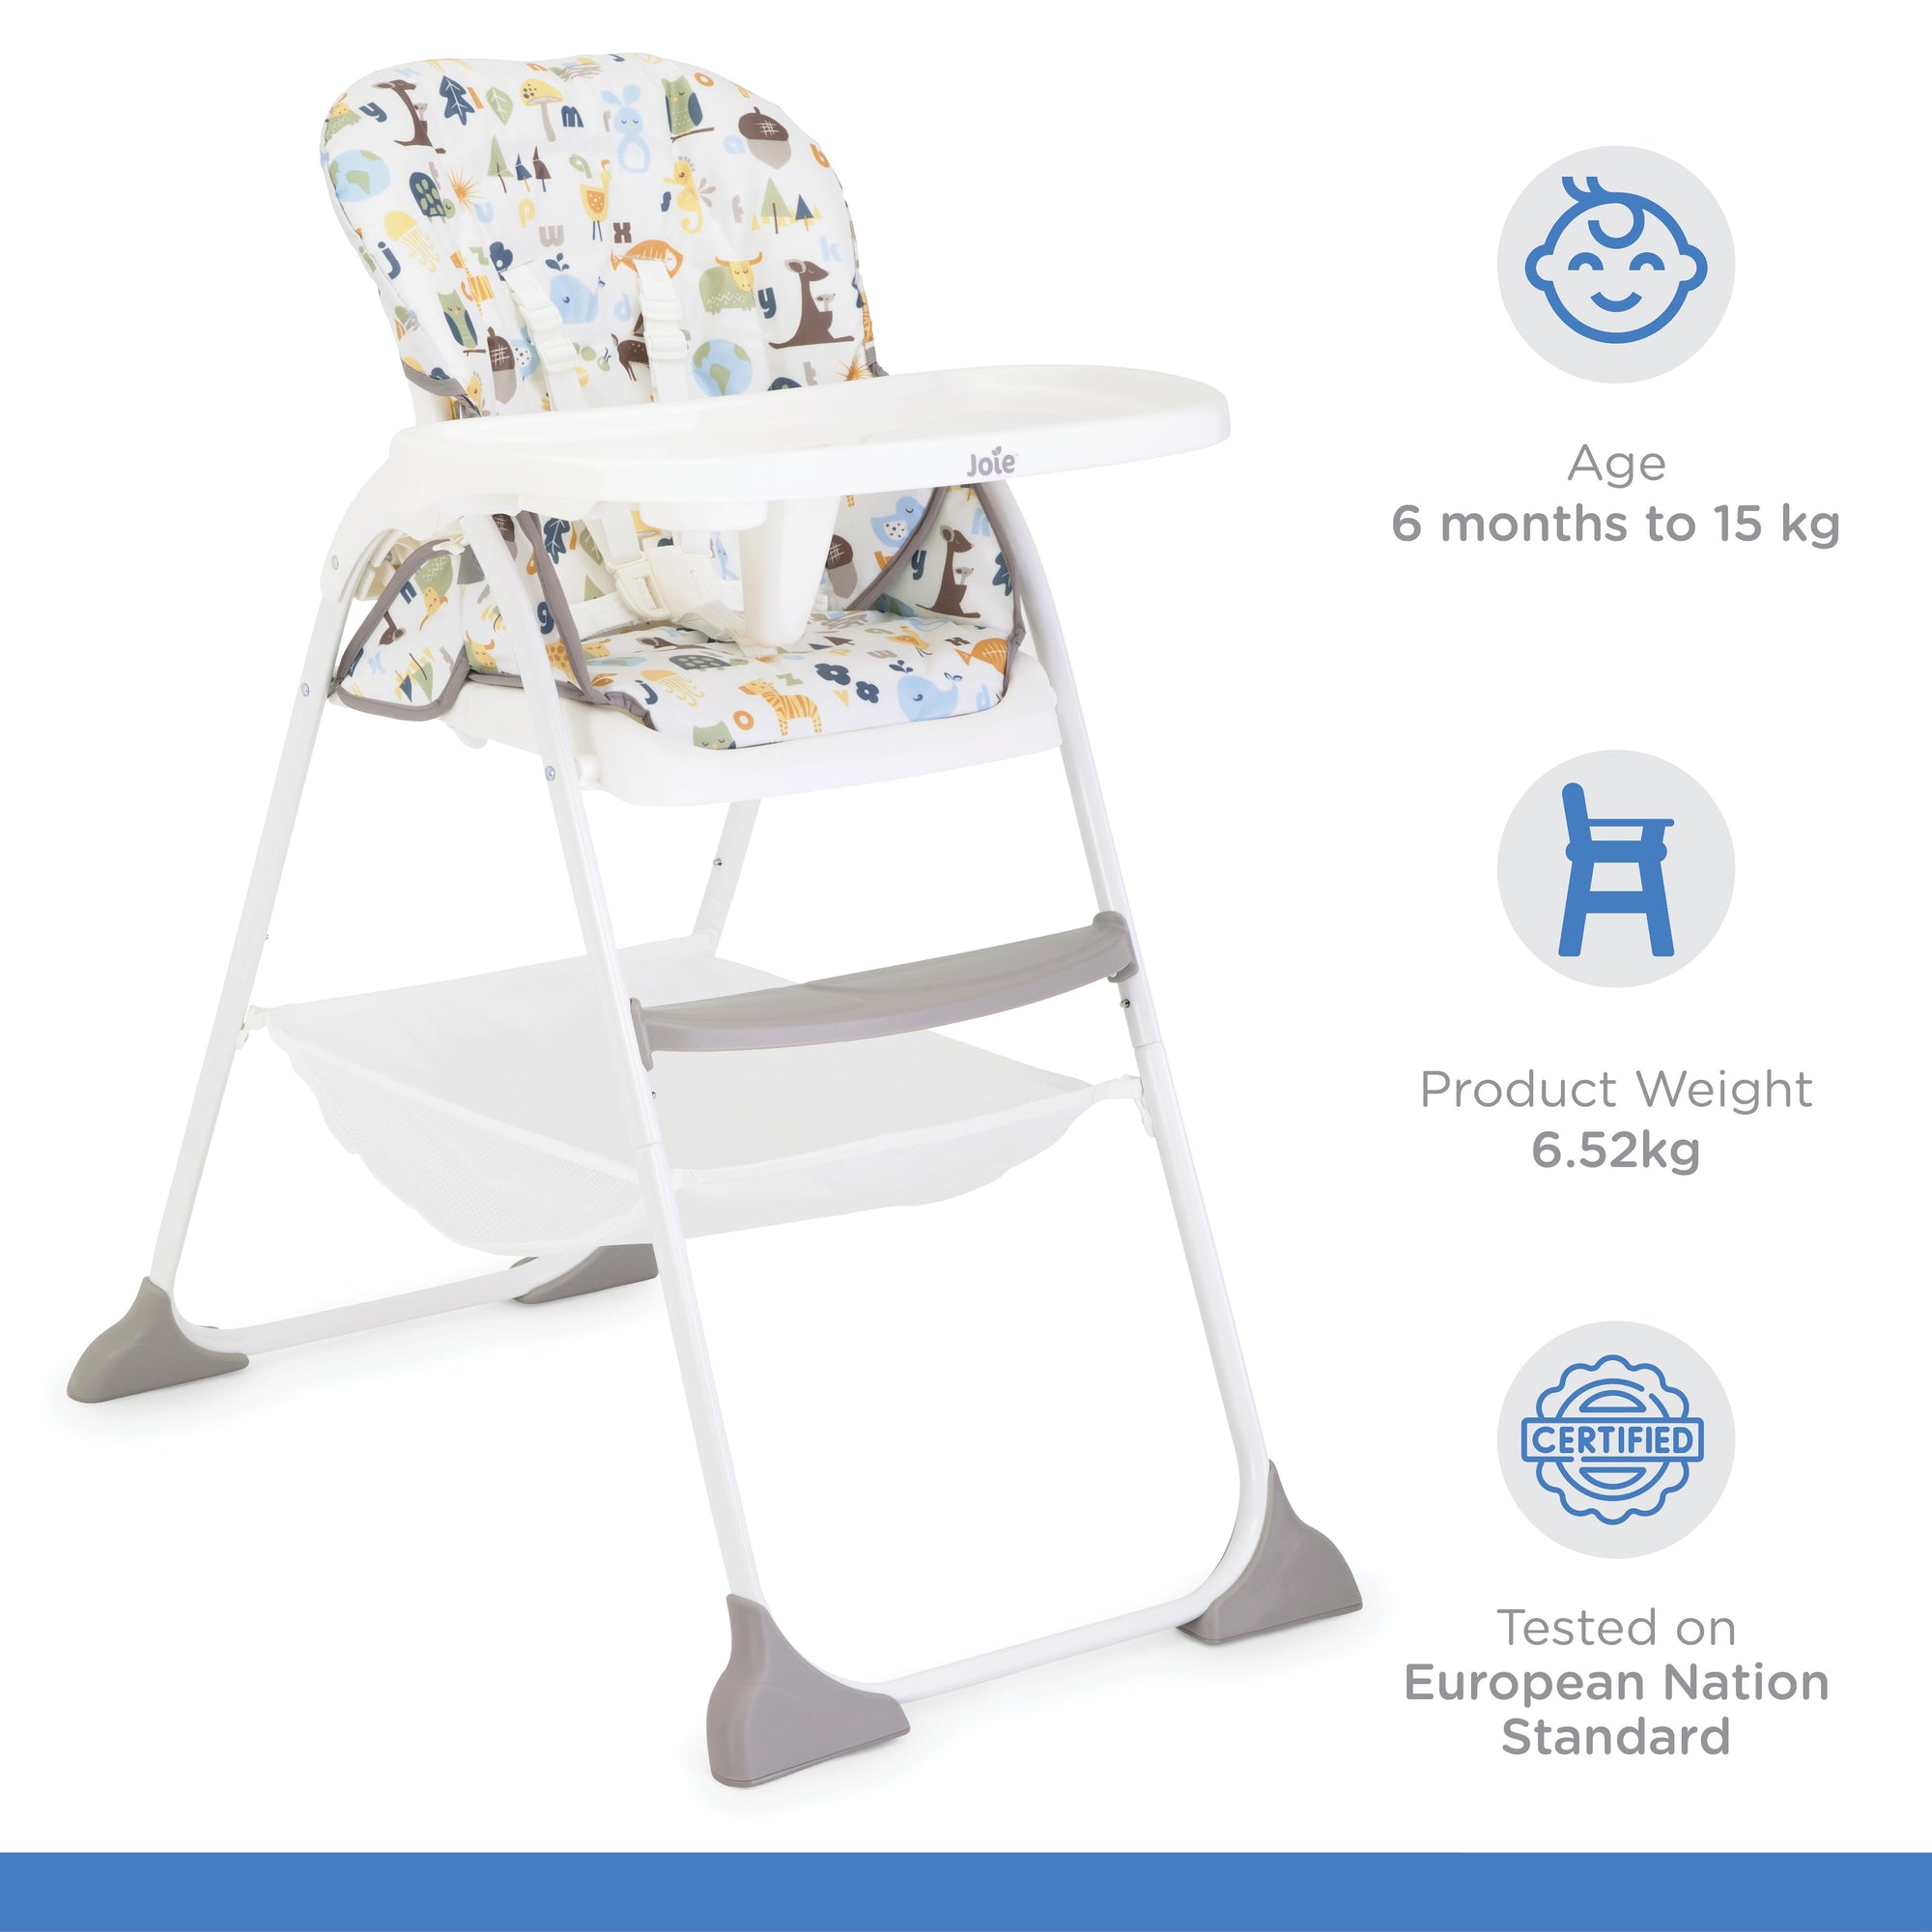 Joie Mimzy Snacker High Chair || Fashion-Alphabet || 6months to 36months - Toys4All.in